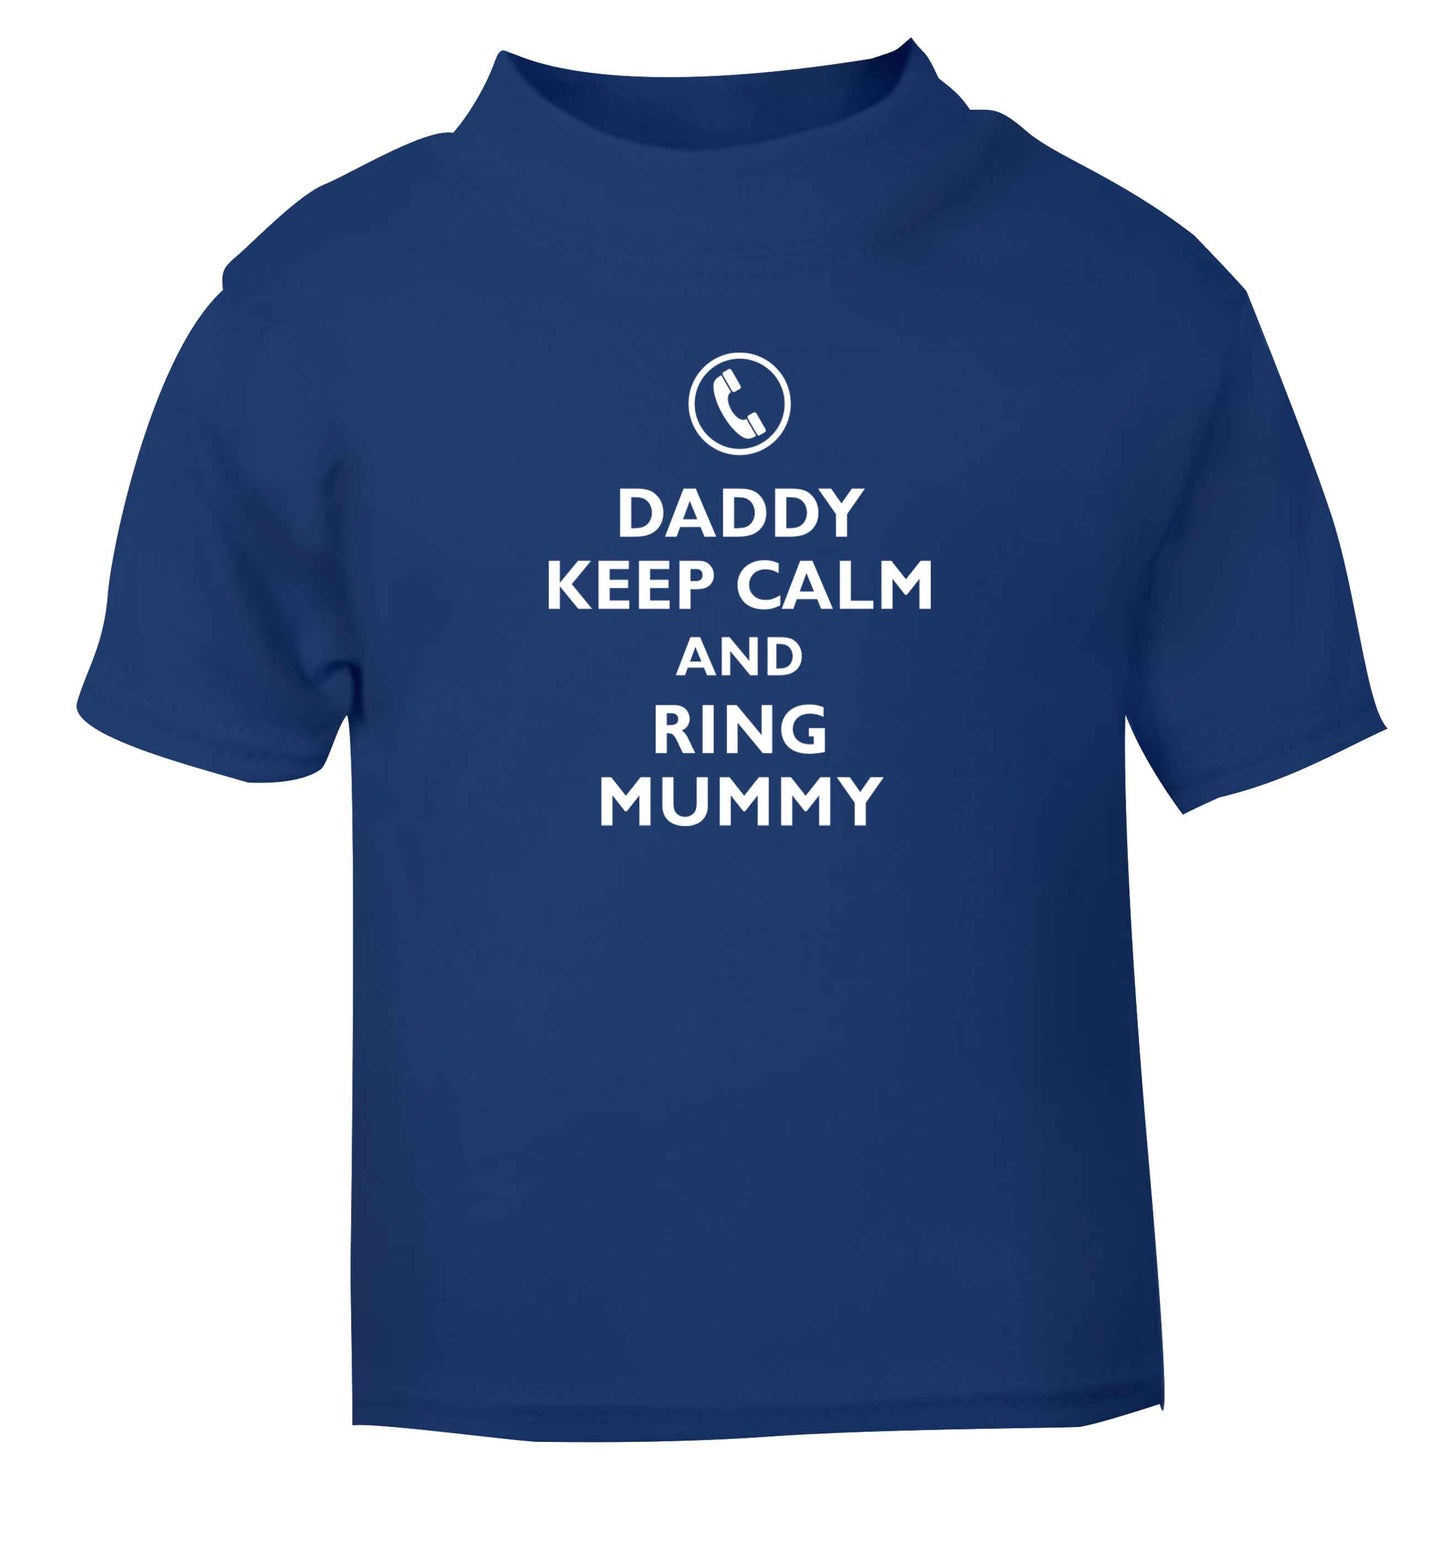 Daddy keep calm and ring mummy blue baby toddler Tshirt 2 Years